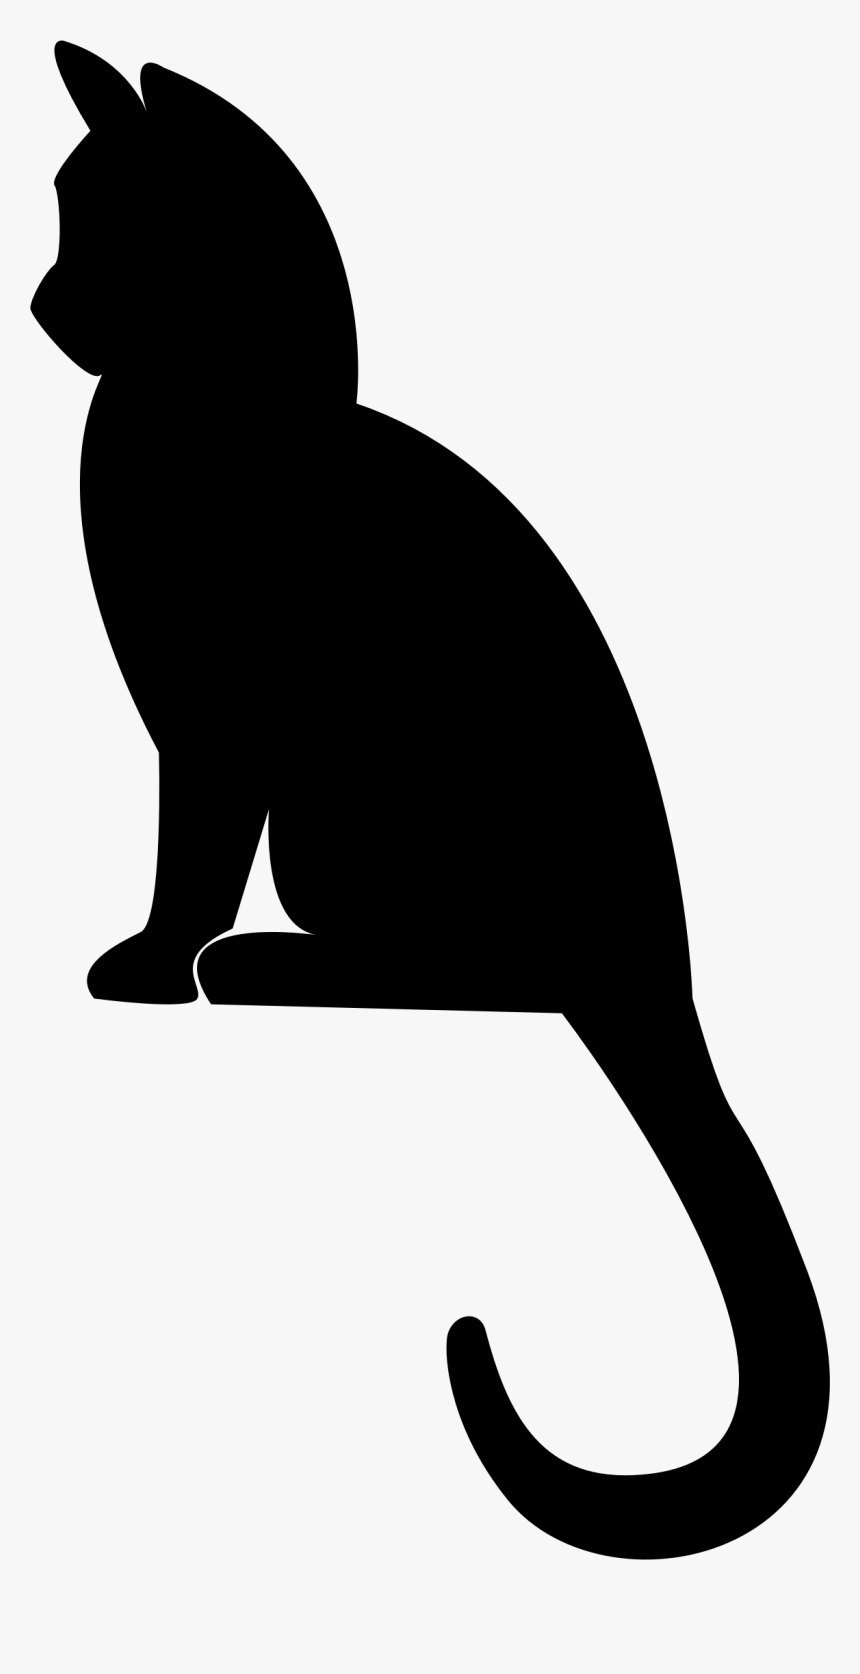 Kitten Silhouette Icons Png - Sitting Kitten Silhouette, Transparent Png, Free Download